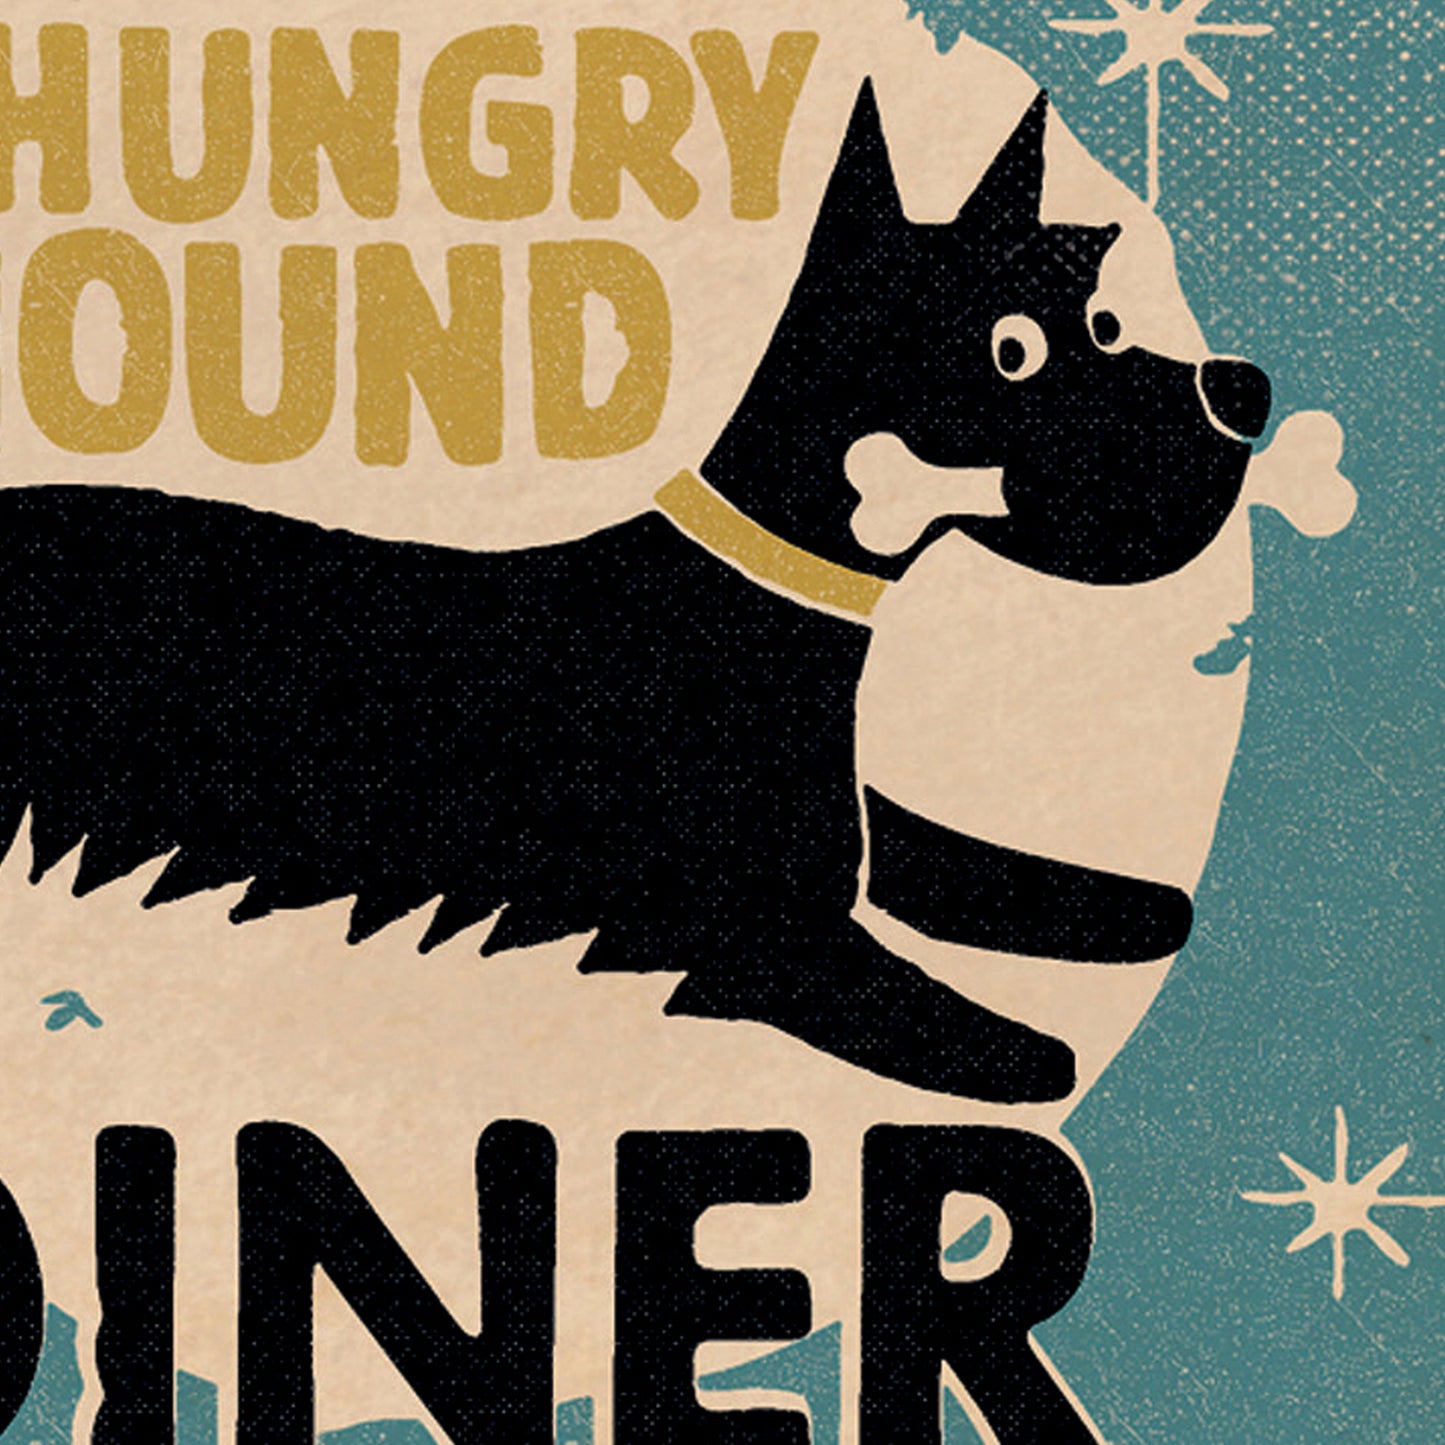 Matchbox Card: The Hungry Hound Diner – Blue